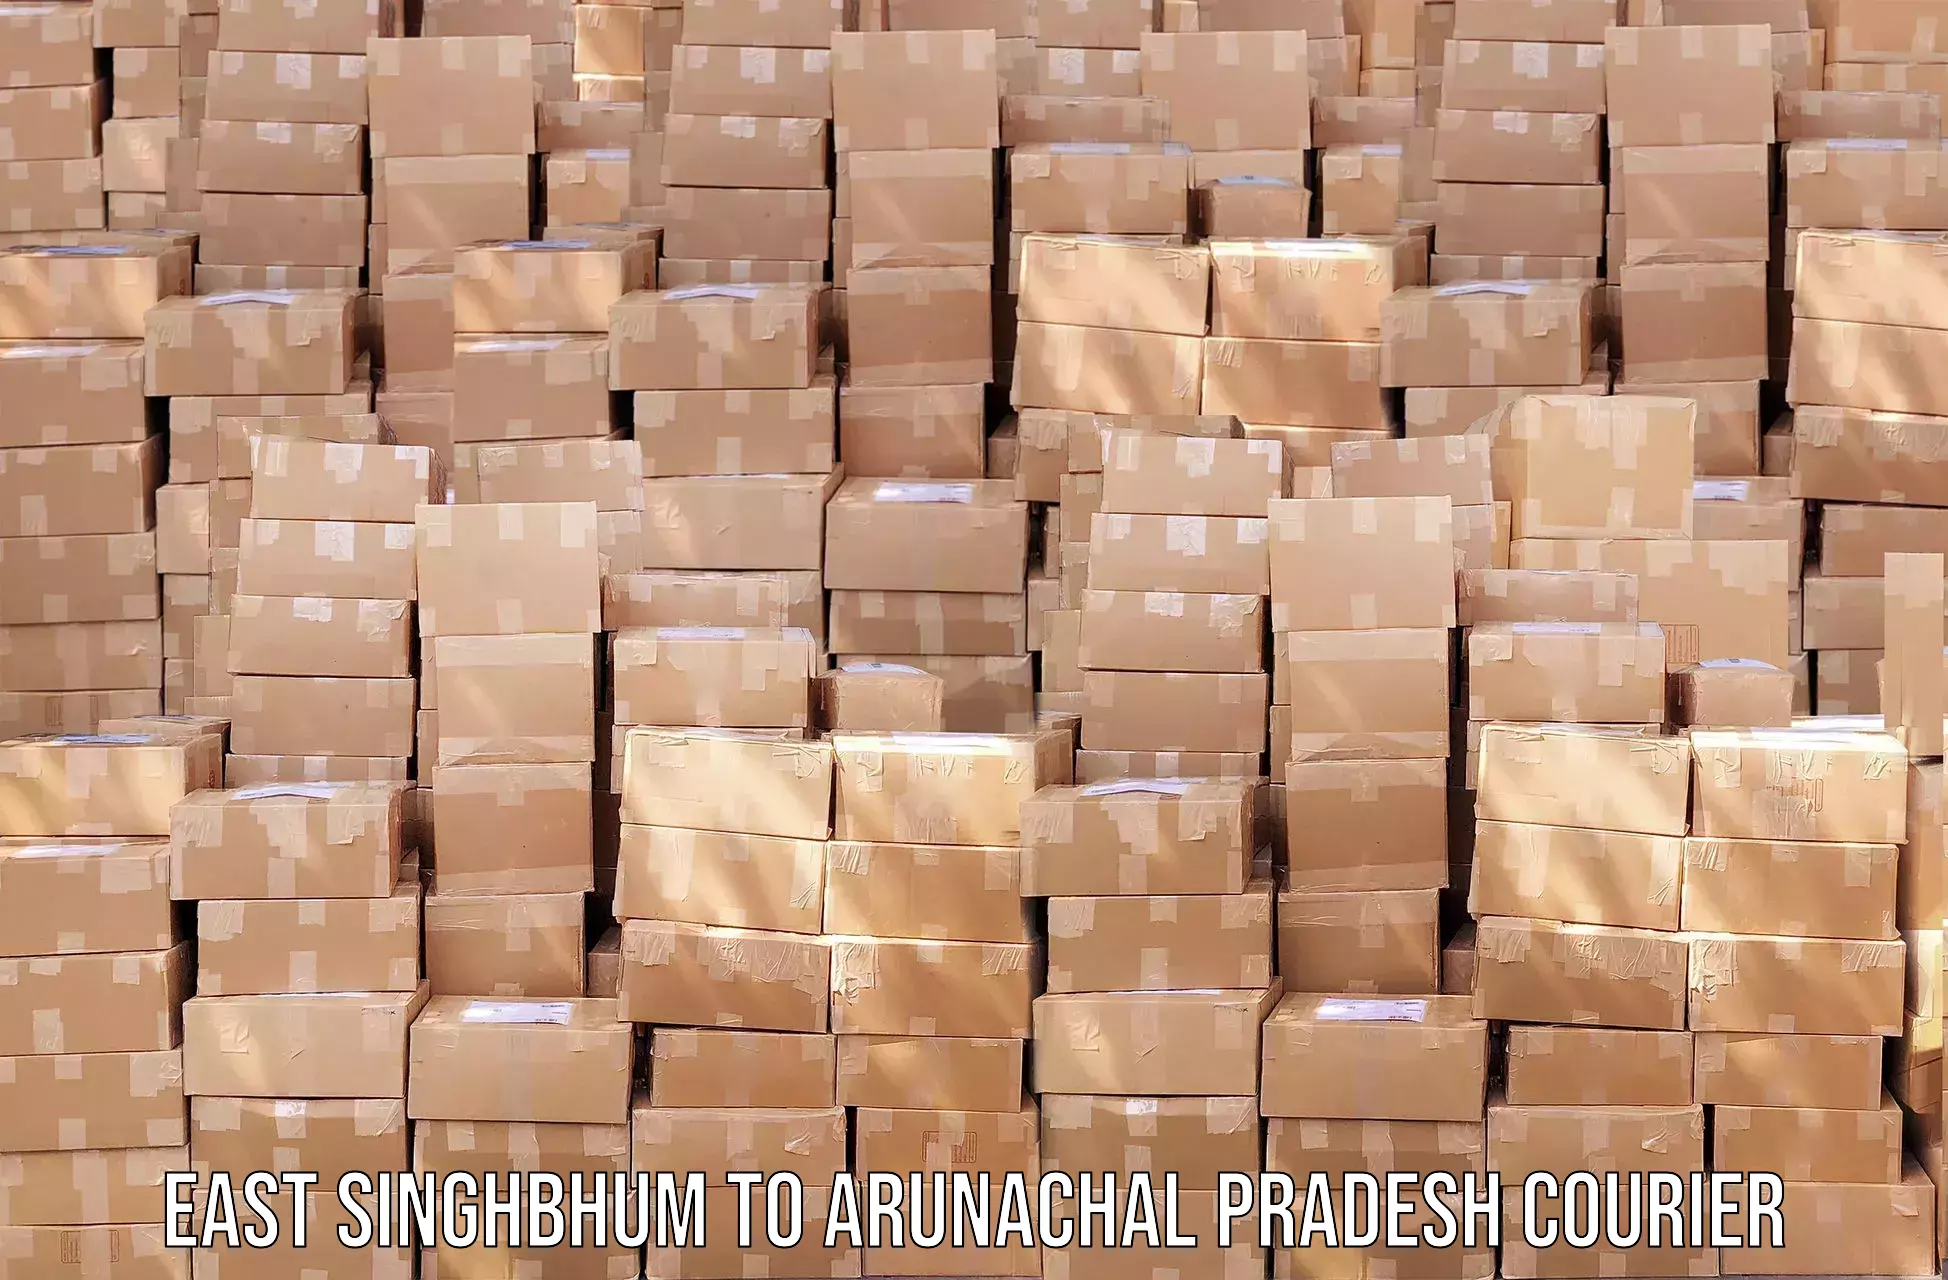 Professional courier handling in East Singhbhum to Tirap